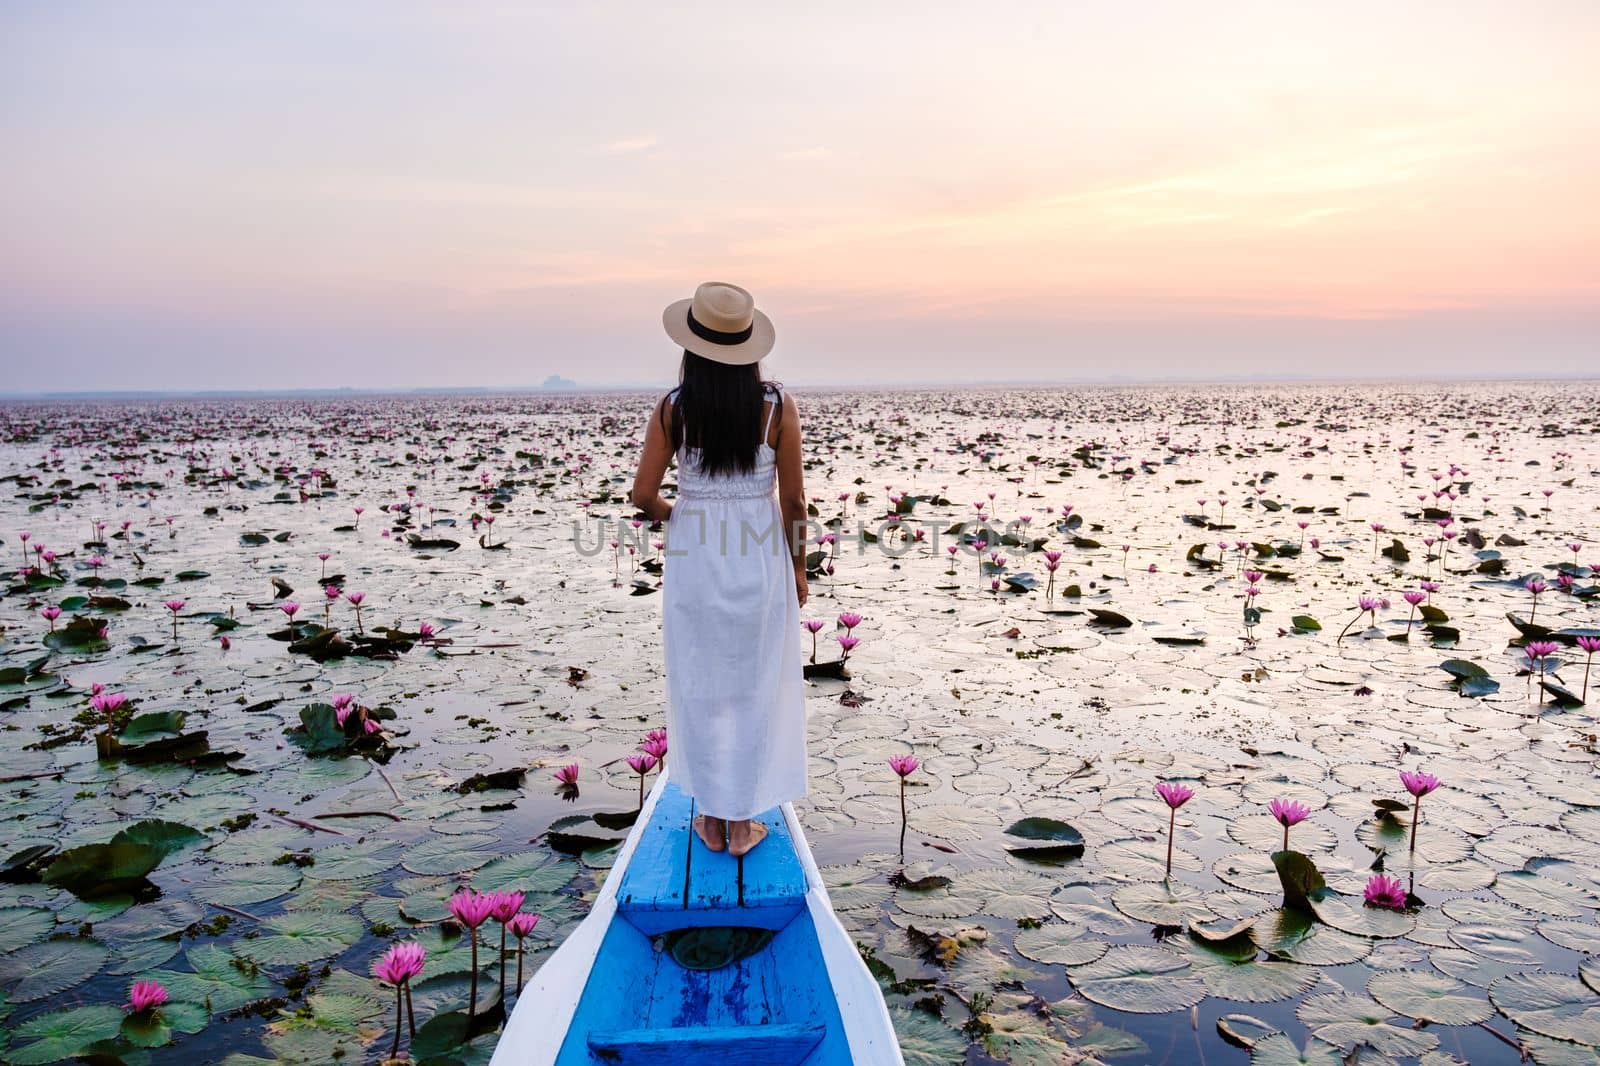 Asian women in a boat at the Red Lotus Sea in Udon Thani Thailand. by fokkebok